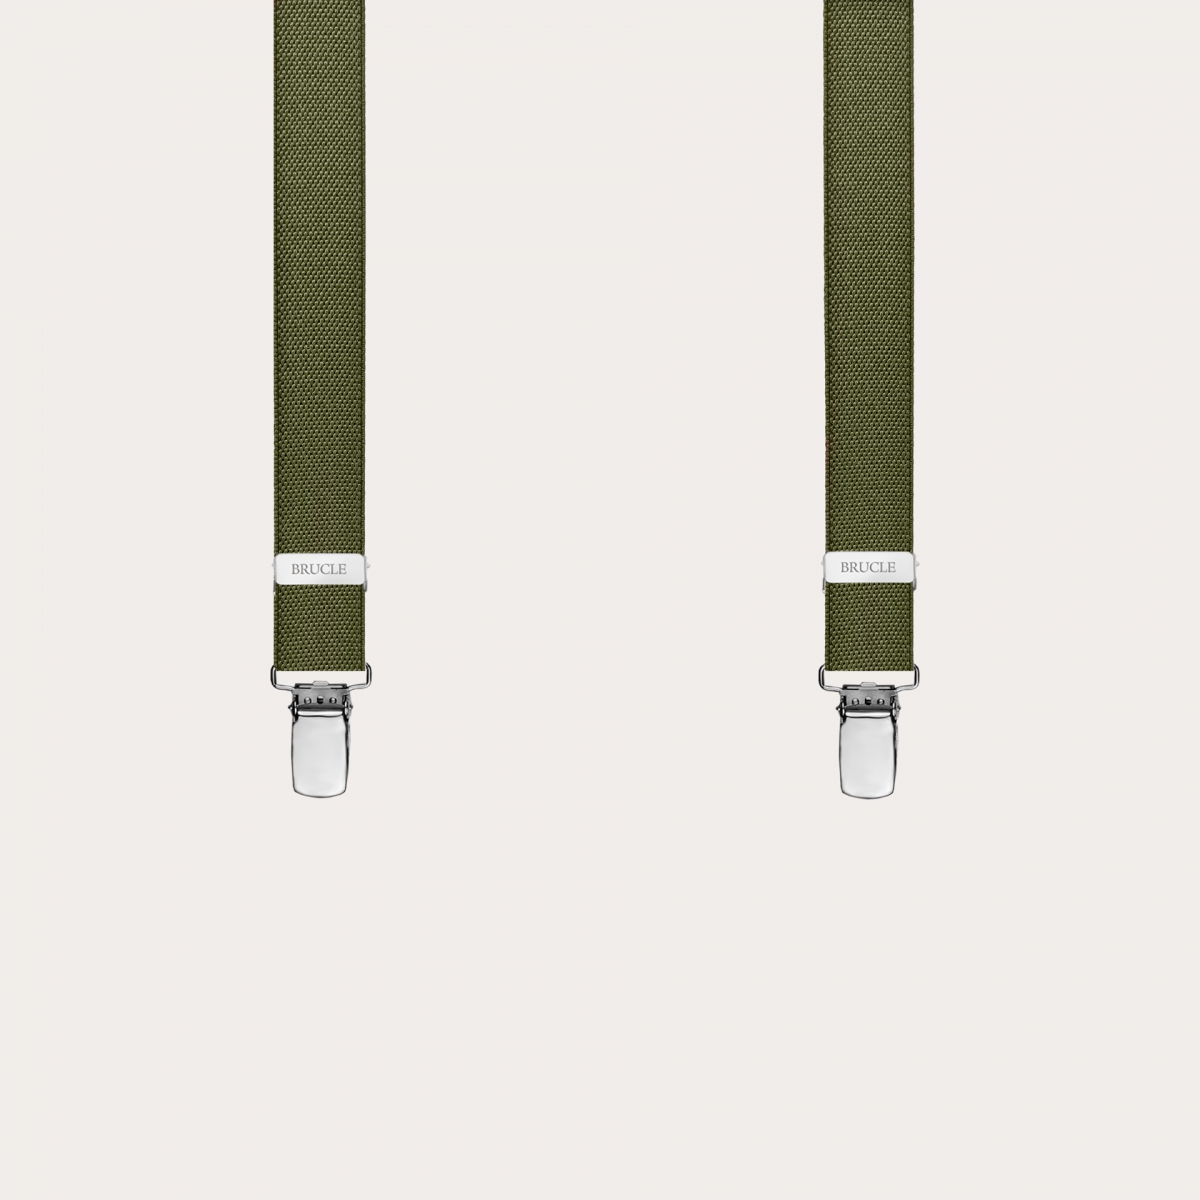 BRUCLE Unisex Y-shaped suspenders for children and teenagers, military green